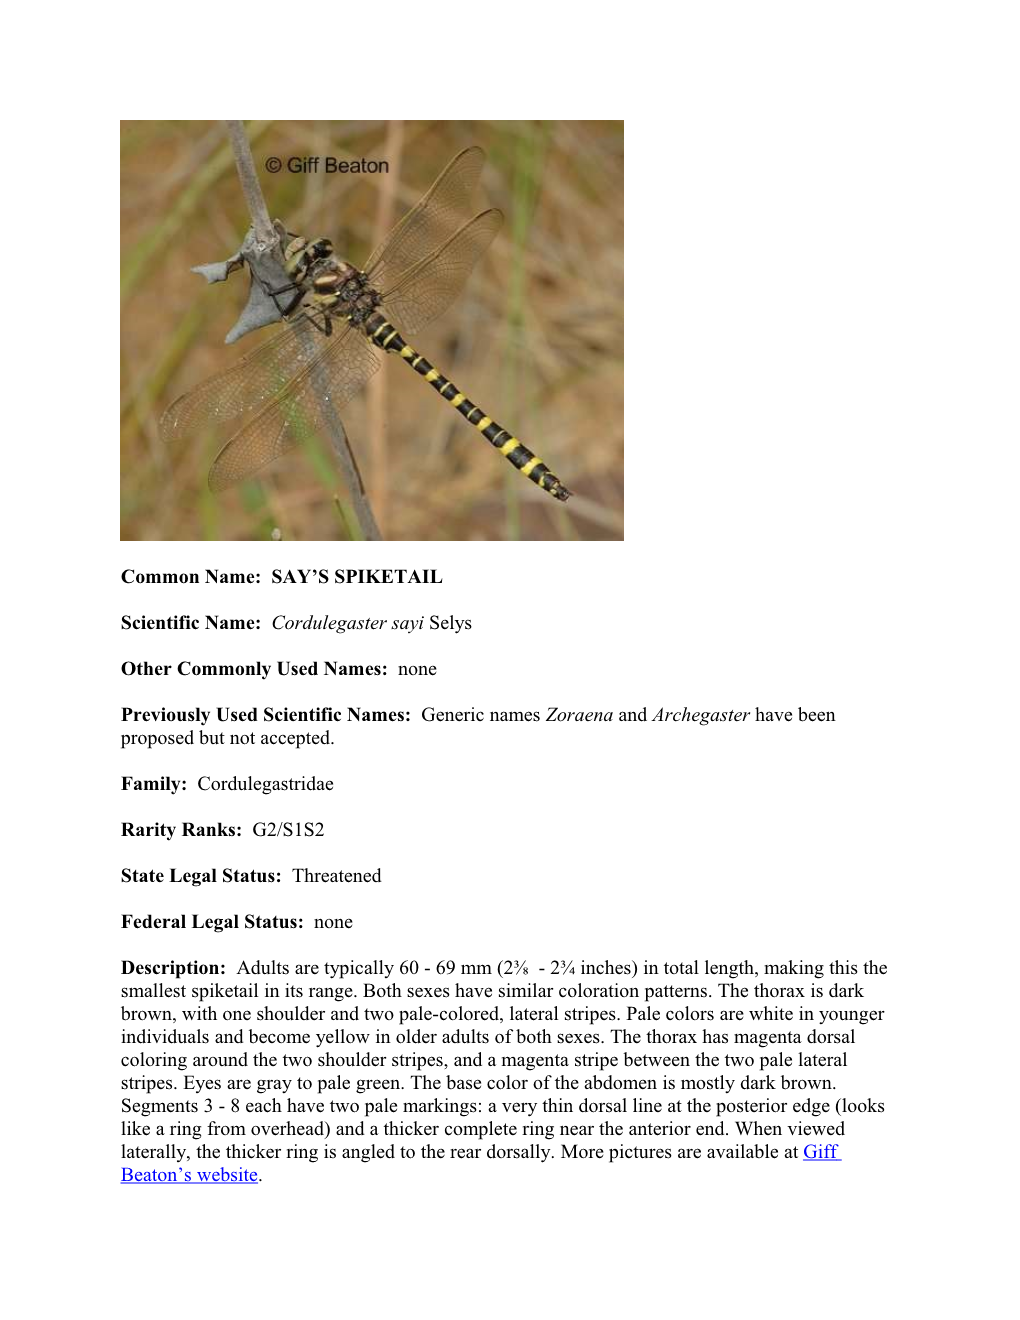 Common Name: SAY's SPIKETAIL